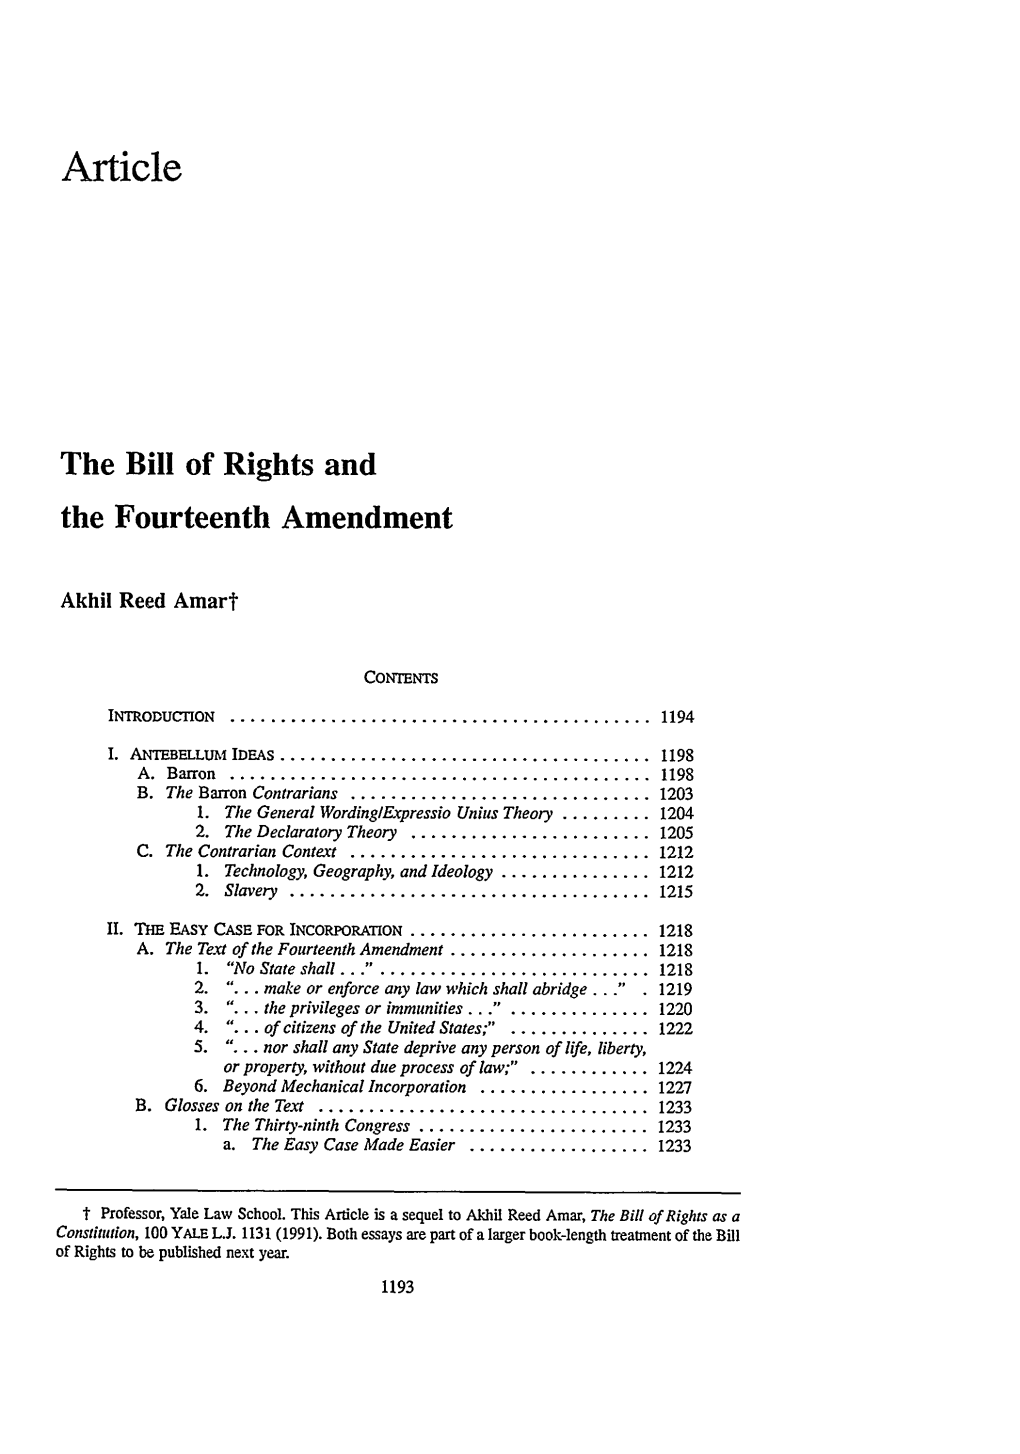 The Bill of Rights and the Fourteenth Amendment